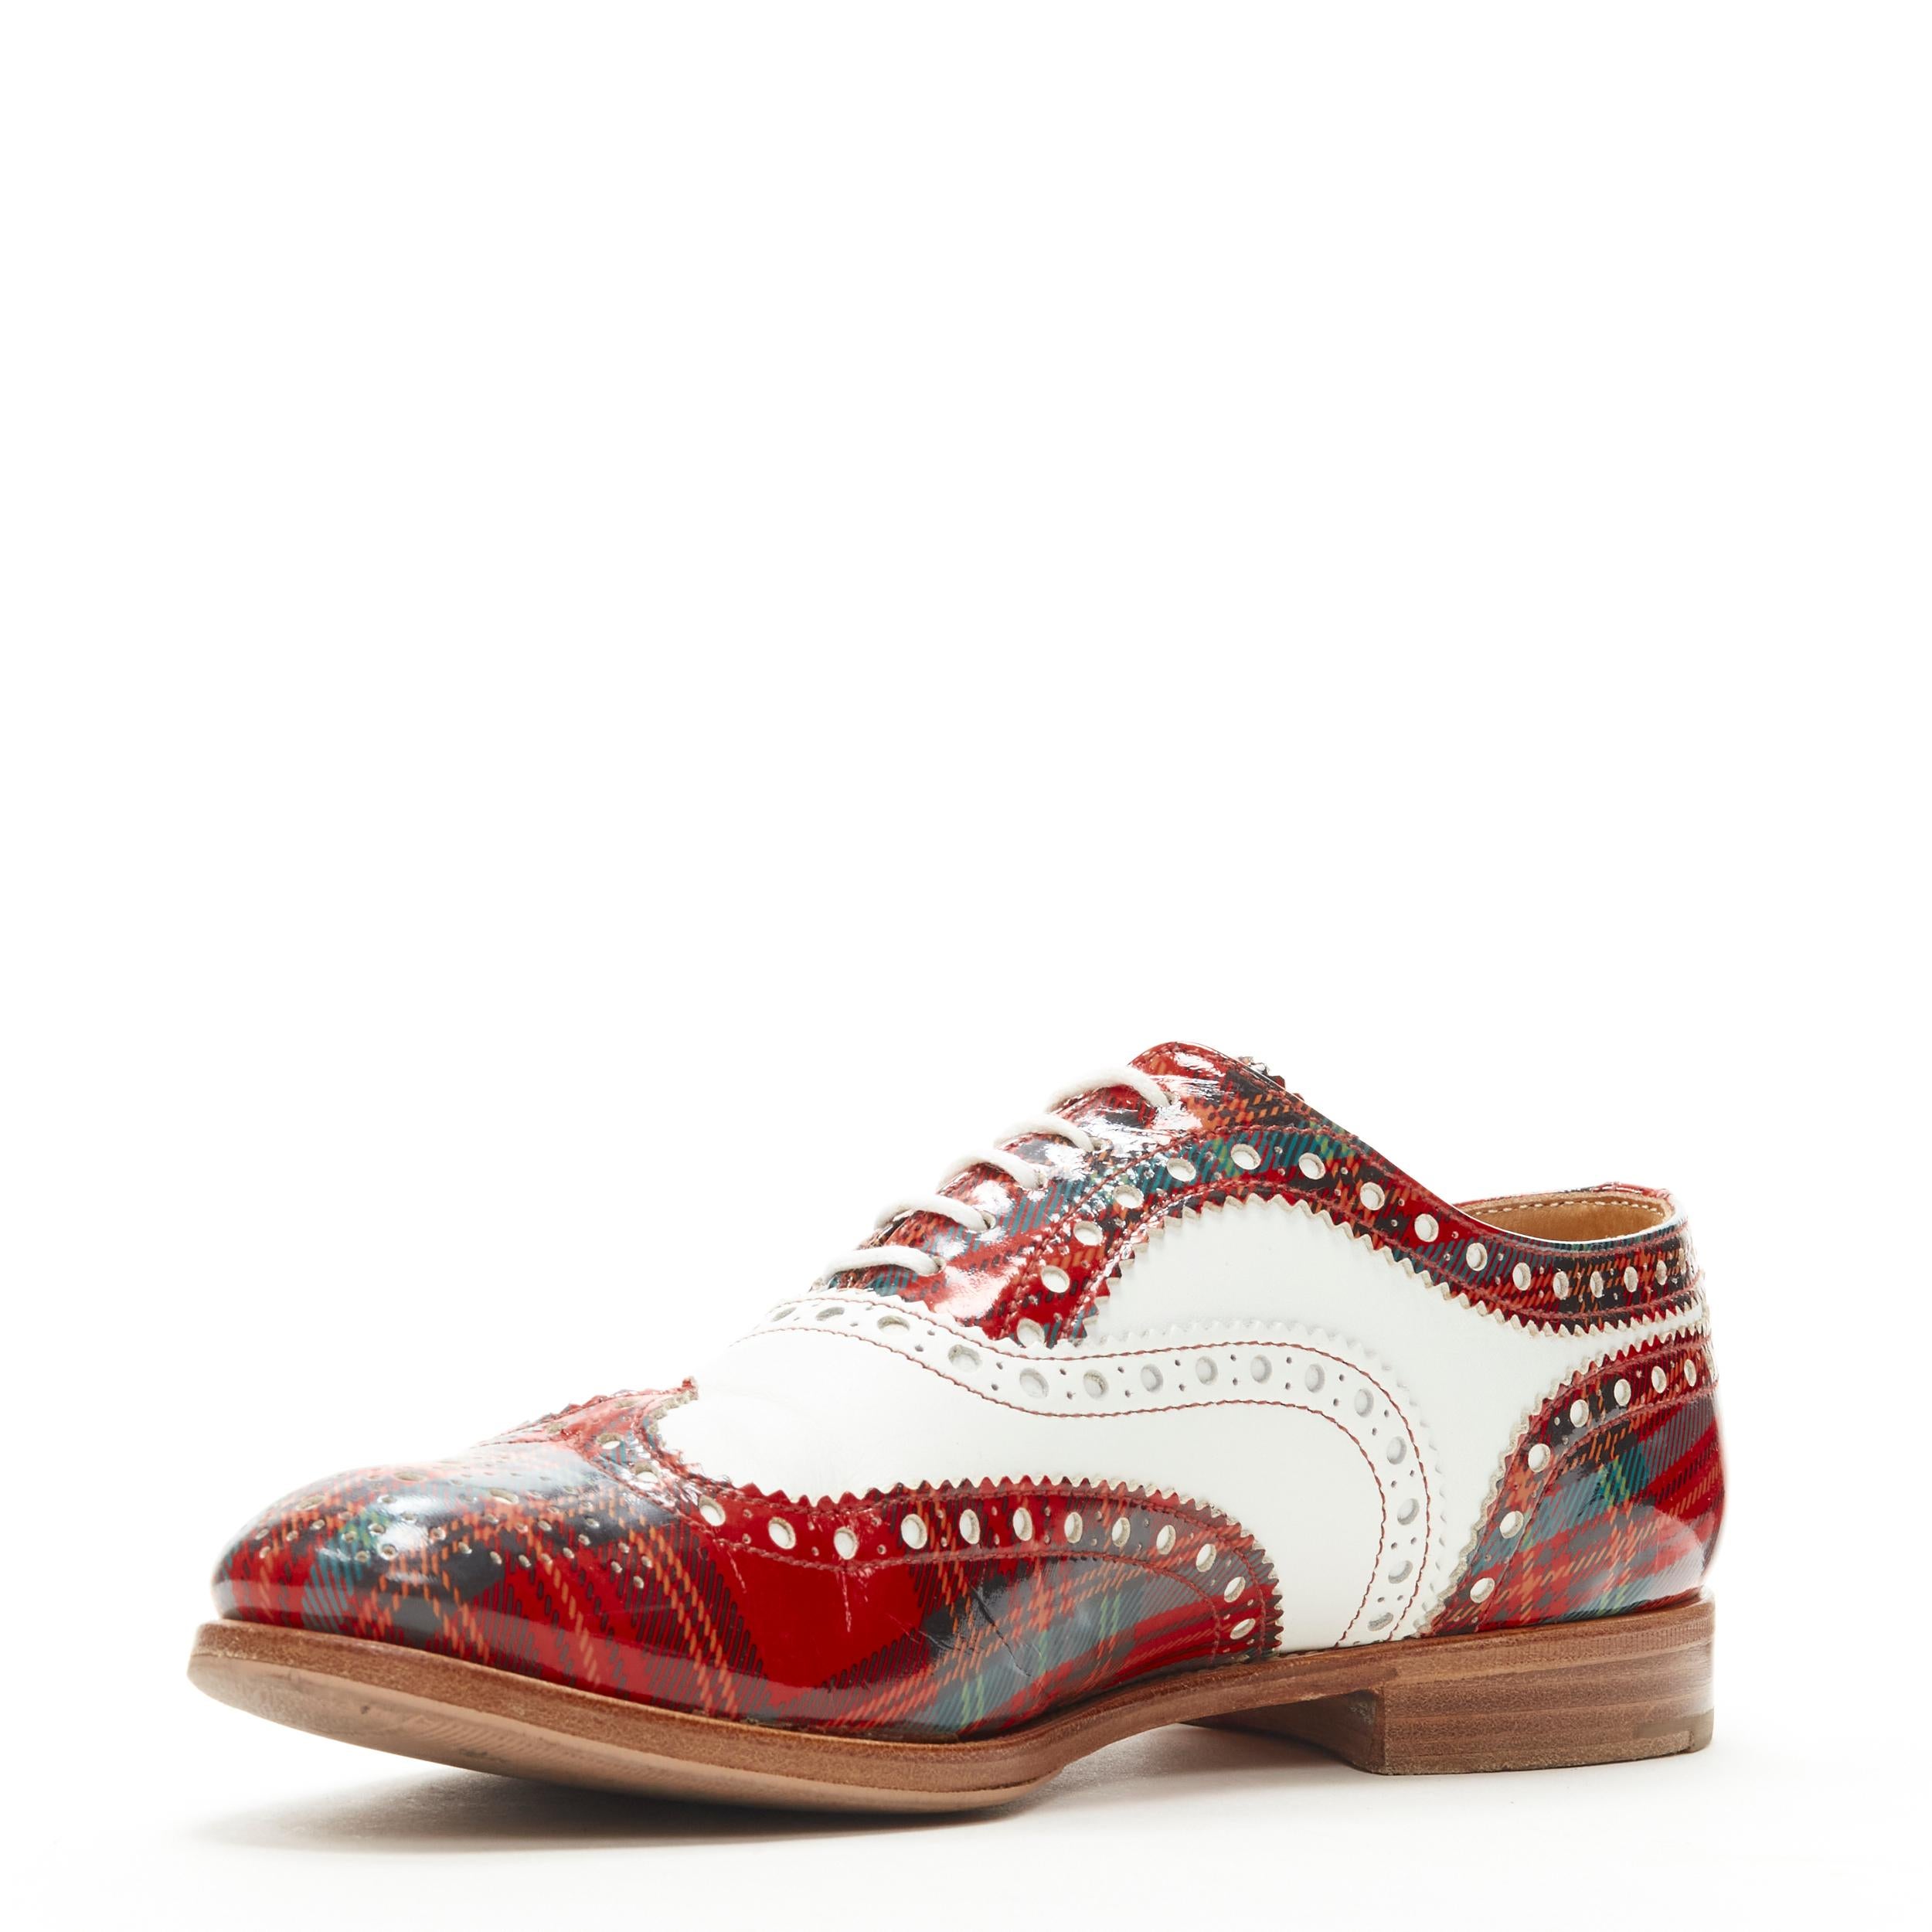 Women's CHURCH'S Burwood red tartan patent white perforated leather brogue EU36.5 For Sale